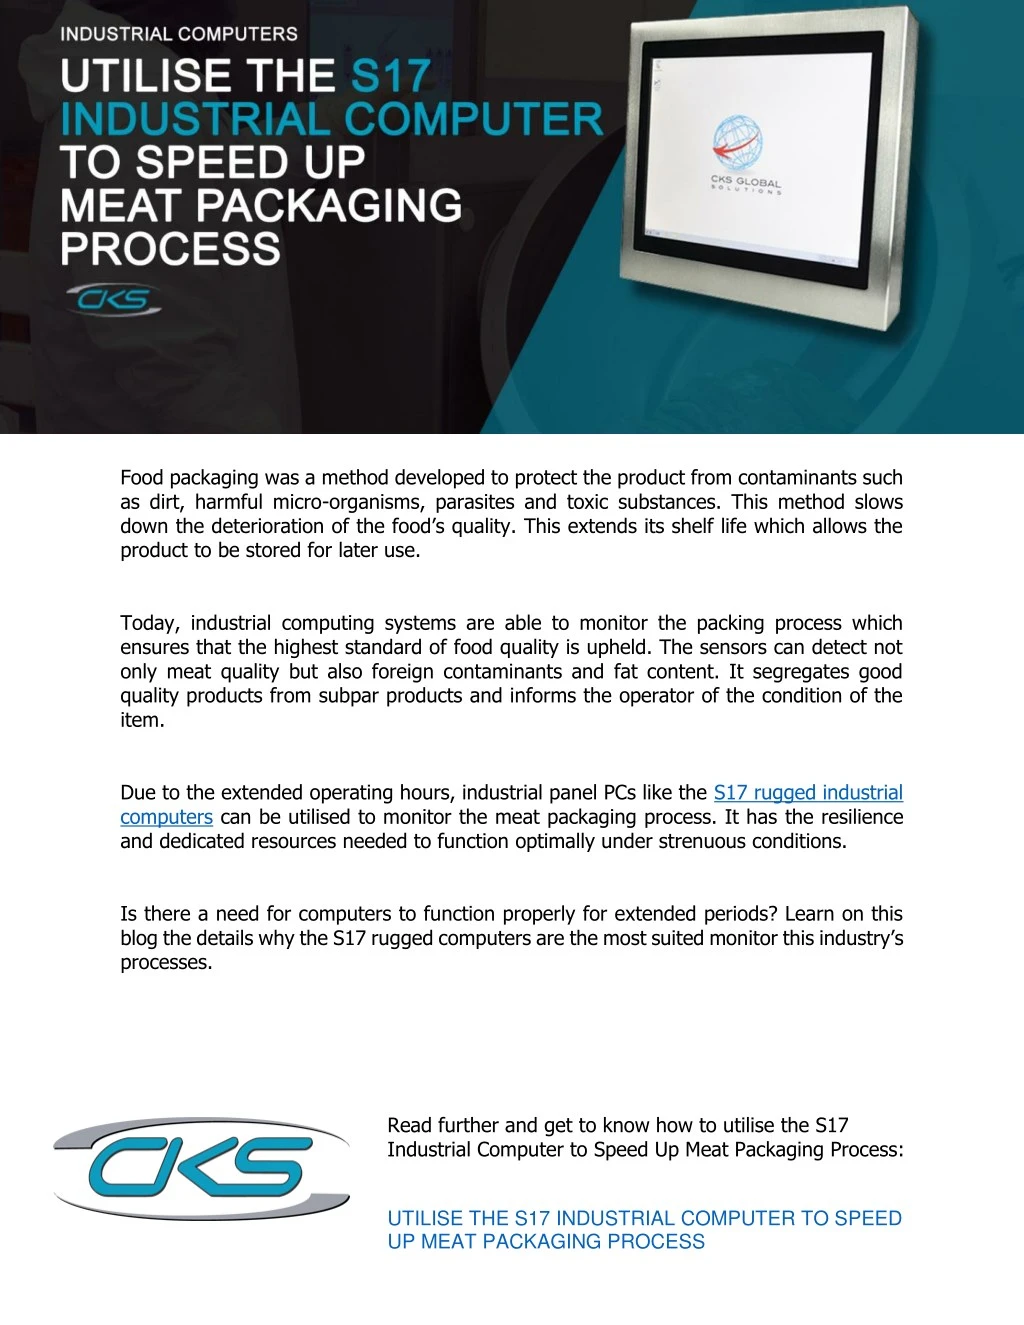 food packaging was a method developed to protect